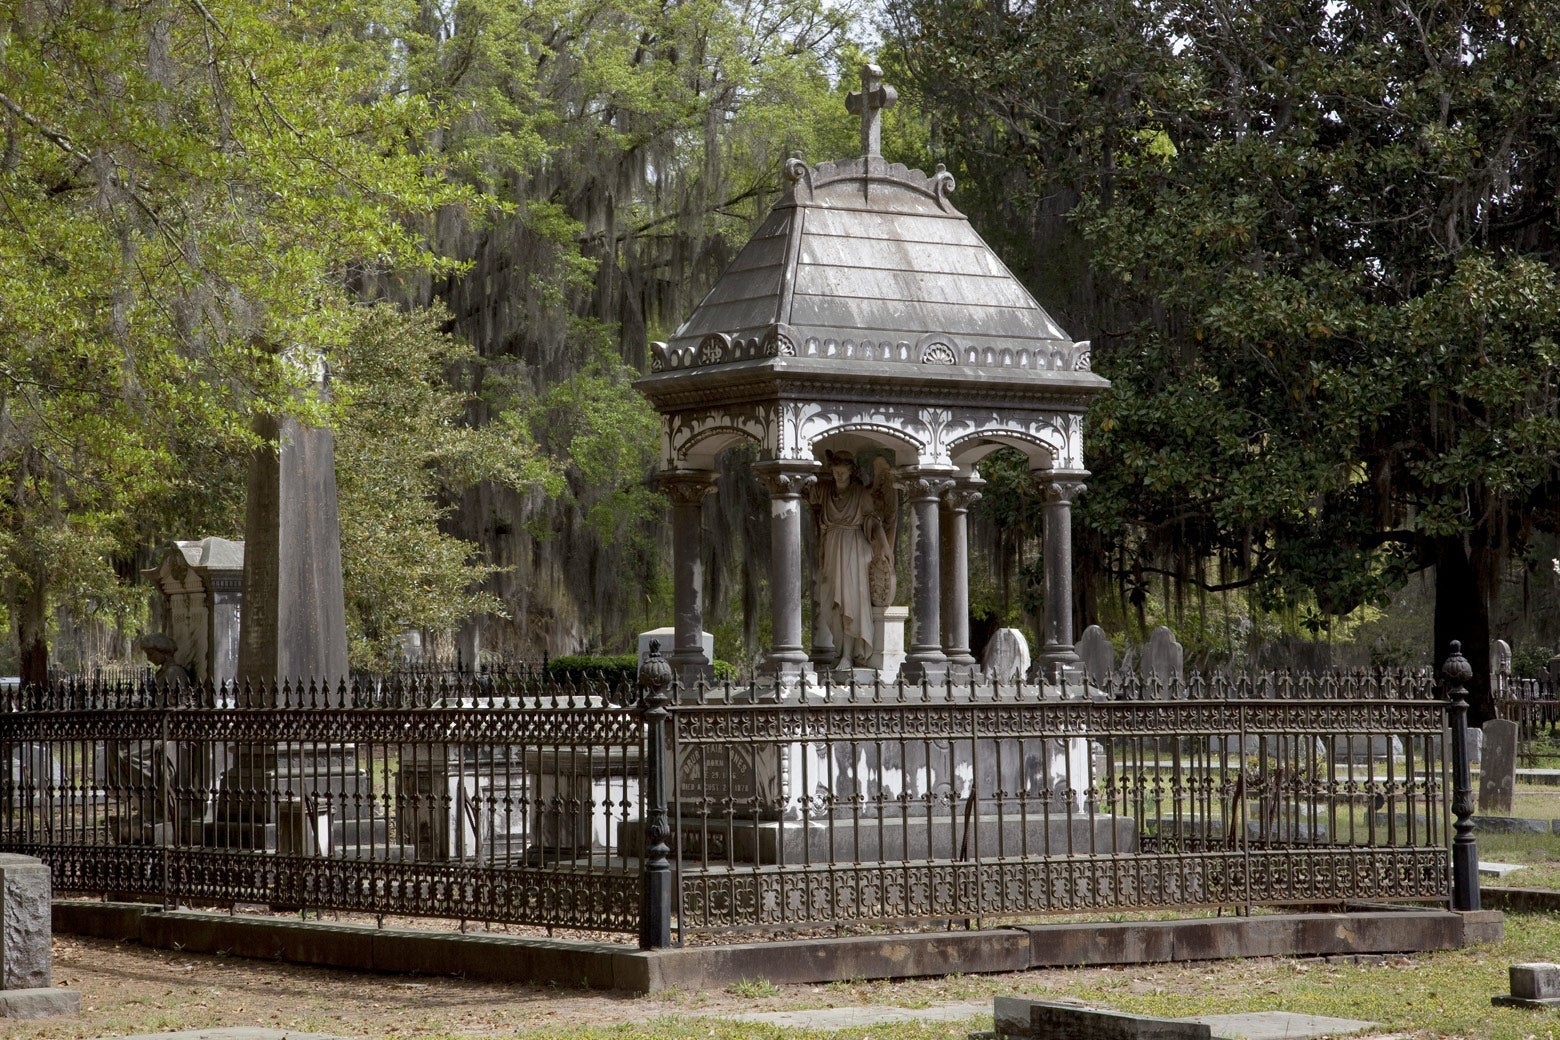 Monuments and tombstones seen in a Southern cemetery.